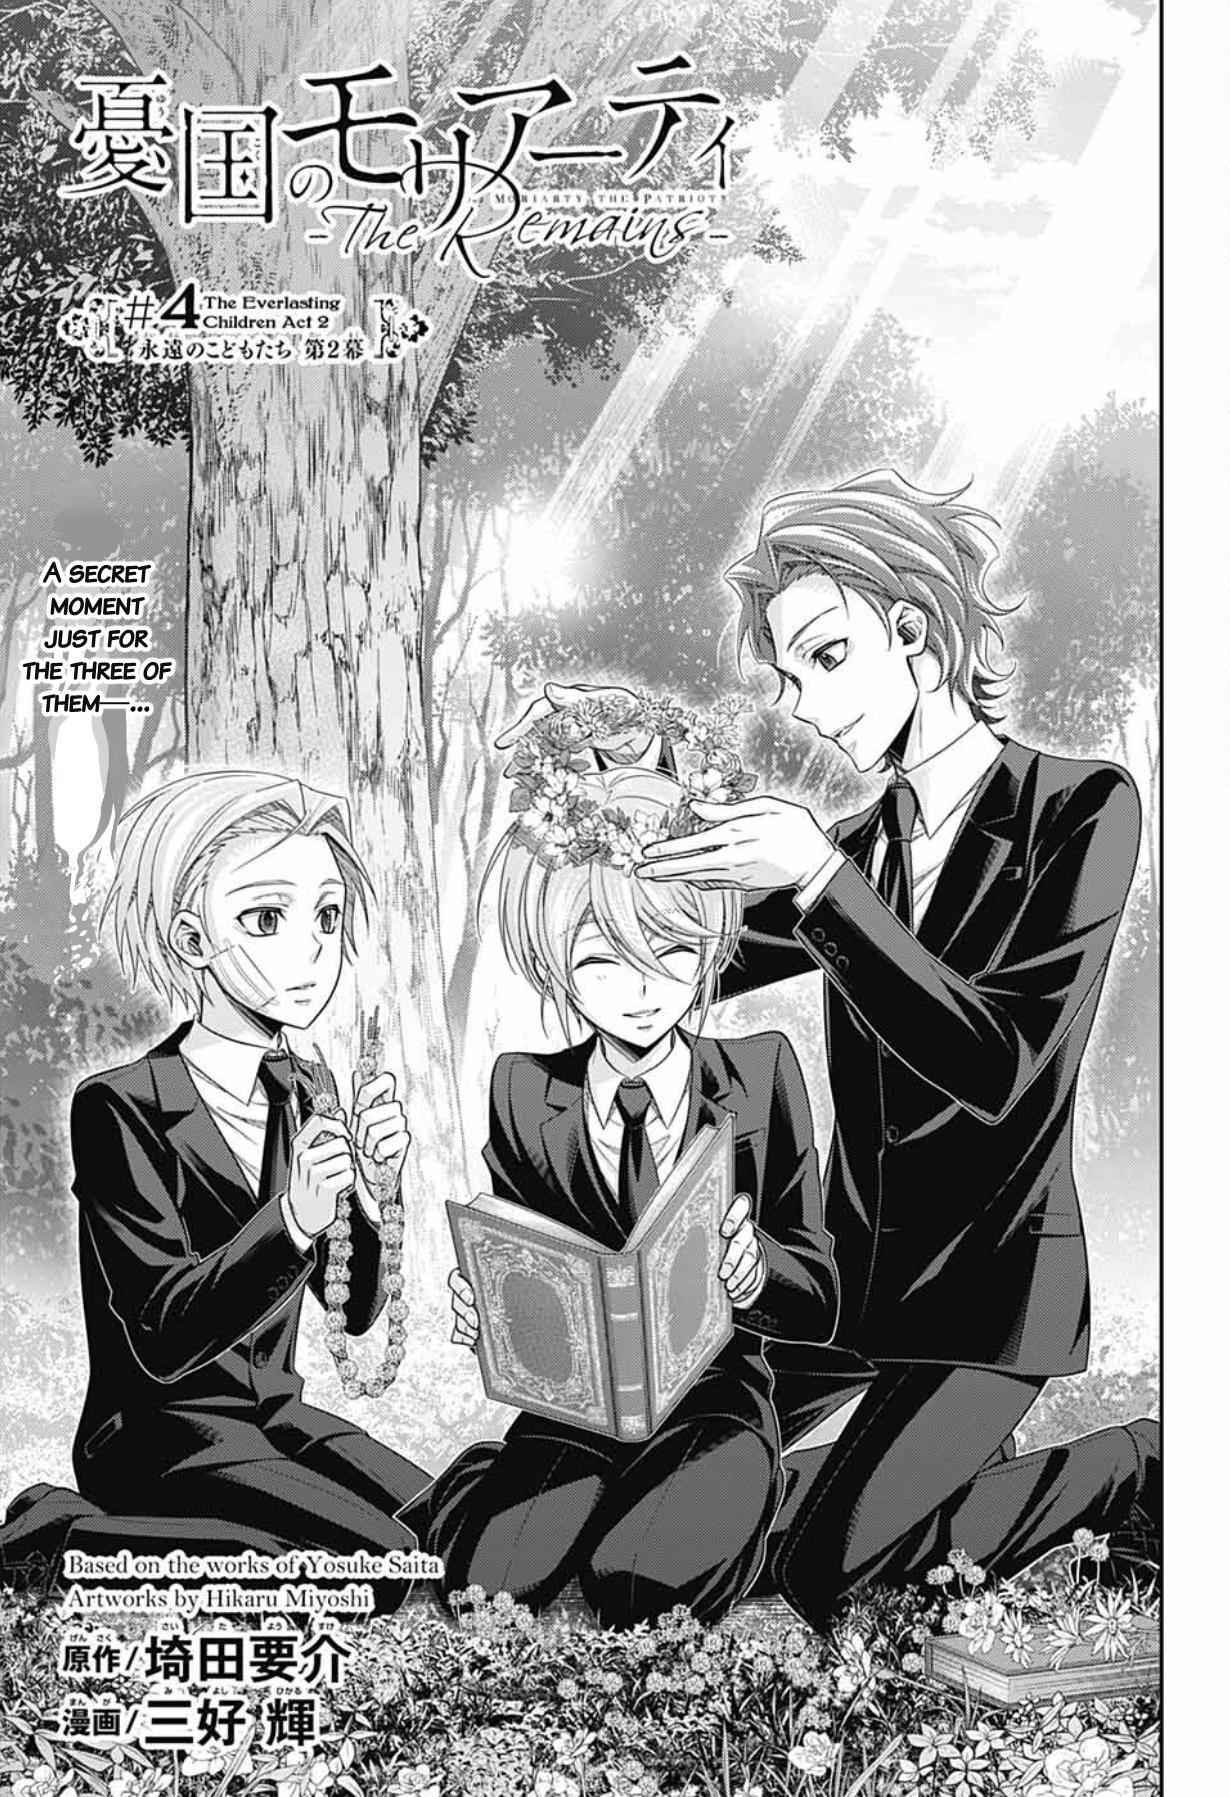 Yuukoku No Moriarty: The Remains Chapter 4: The Everlasting Children, Act 2 - Picture 2